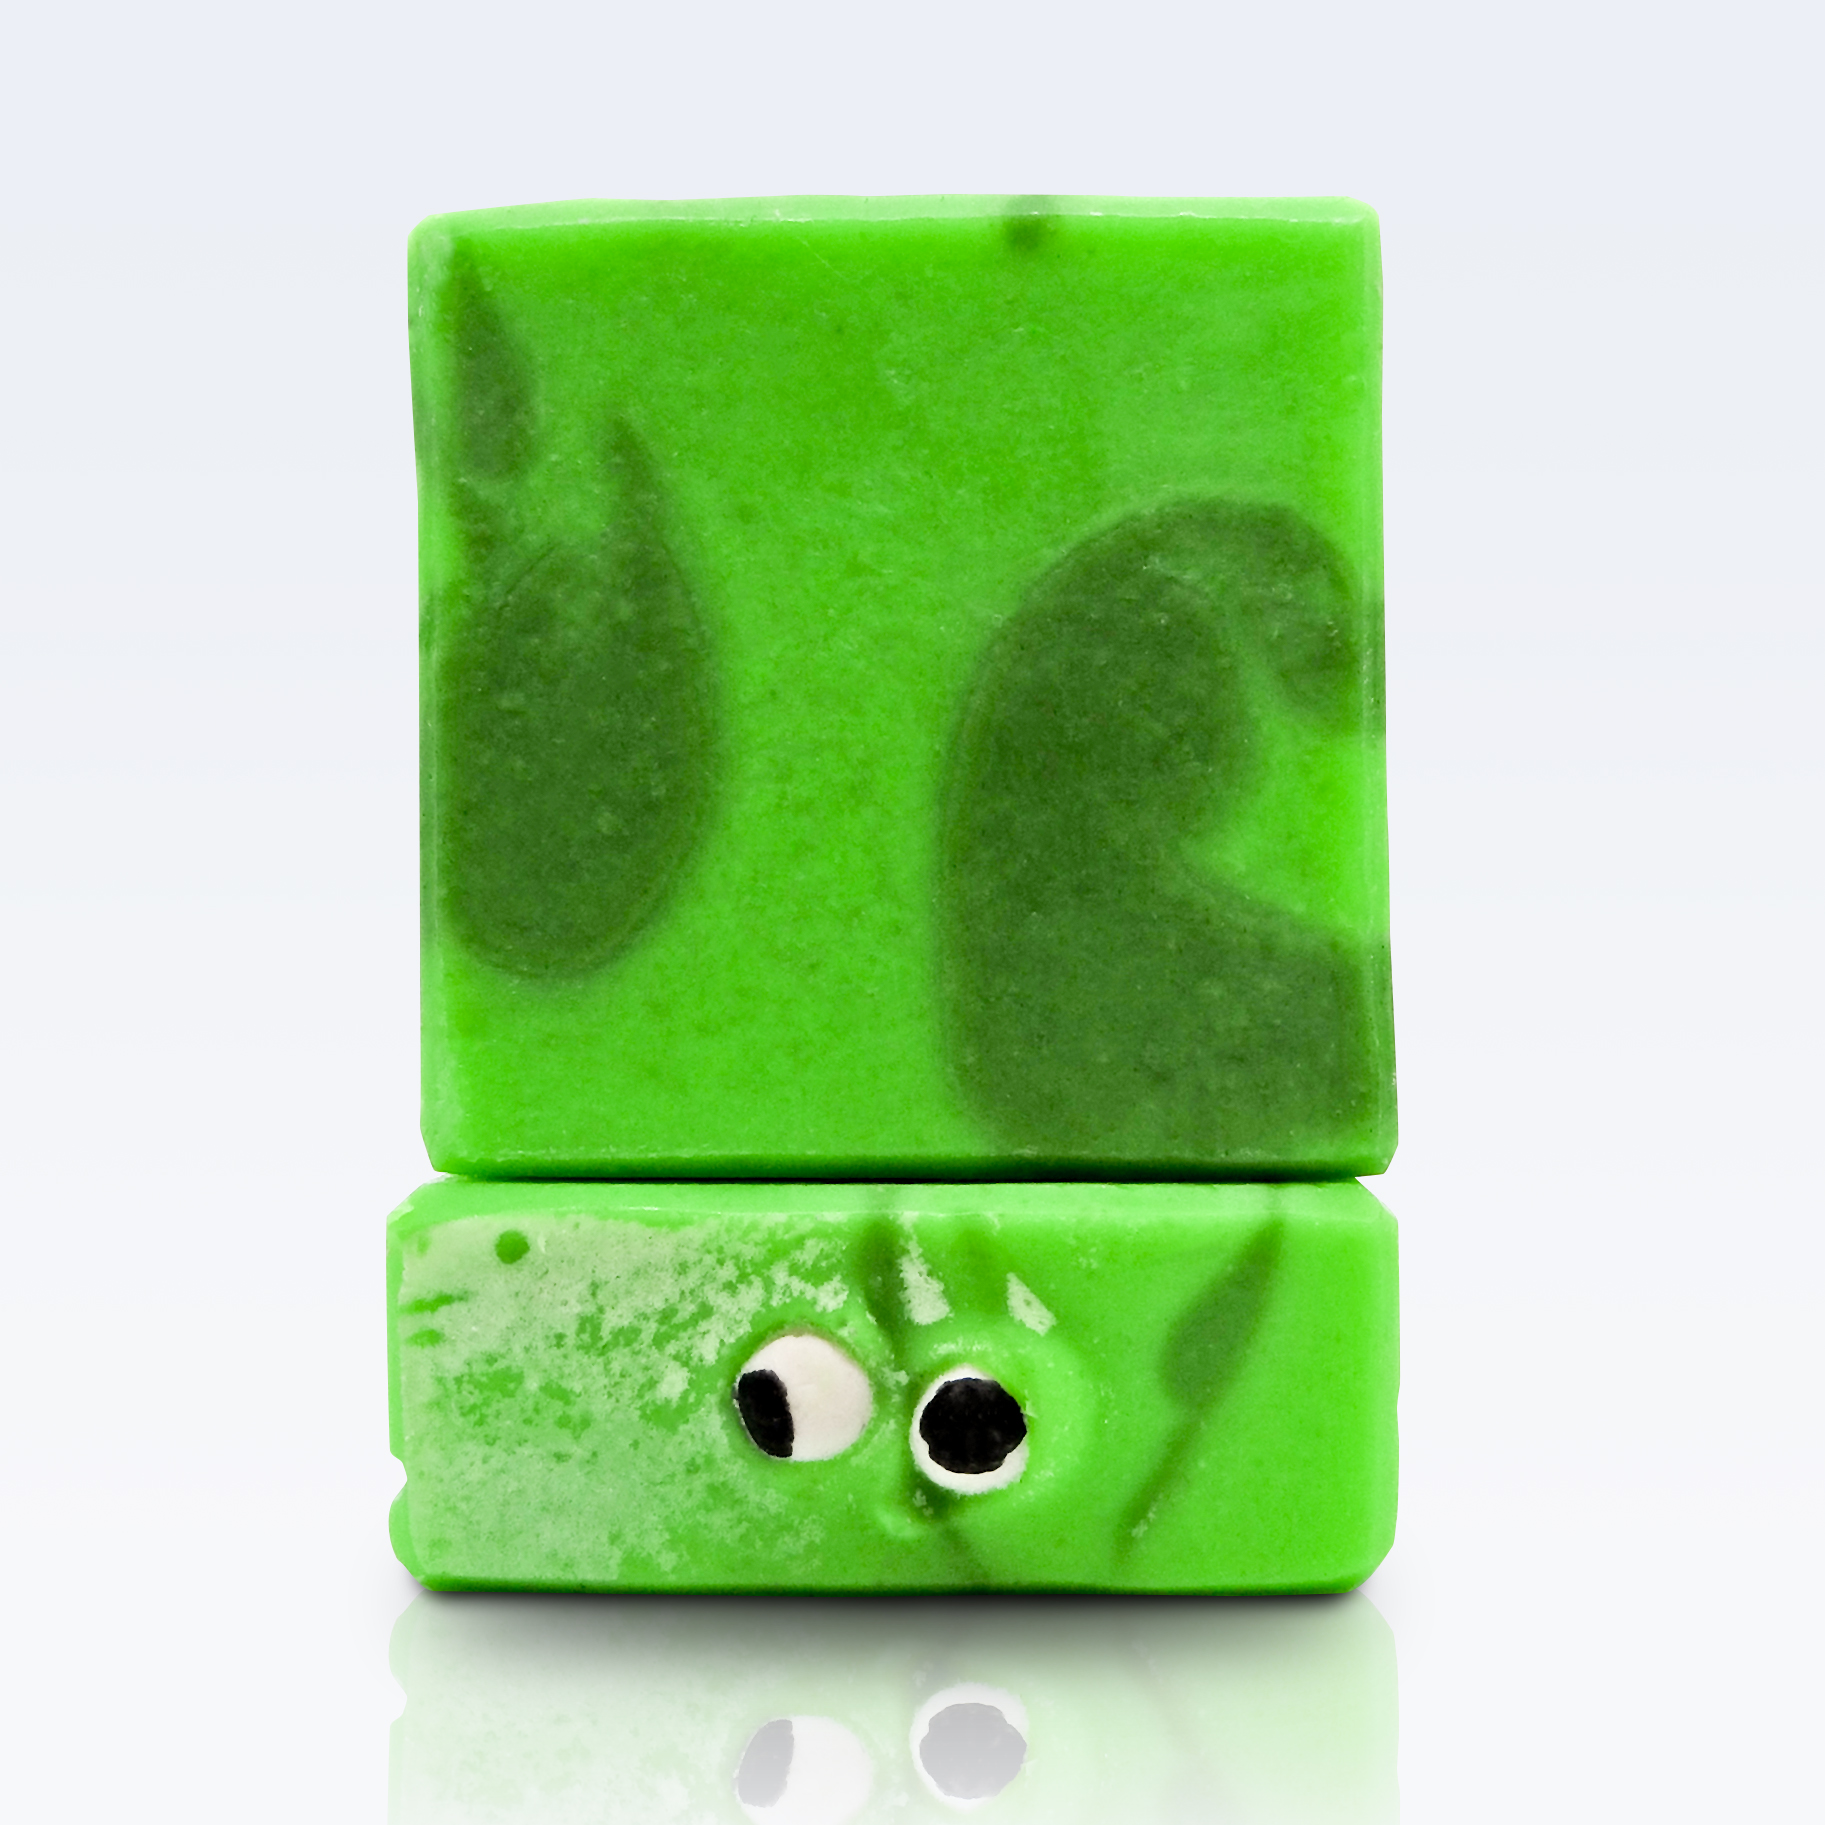 Slime Monster handmade kids soap by Tubby Tabby Soaps (monkey farts fragrance, swirled soap with googly eyes on top)